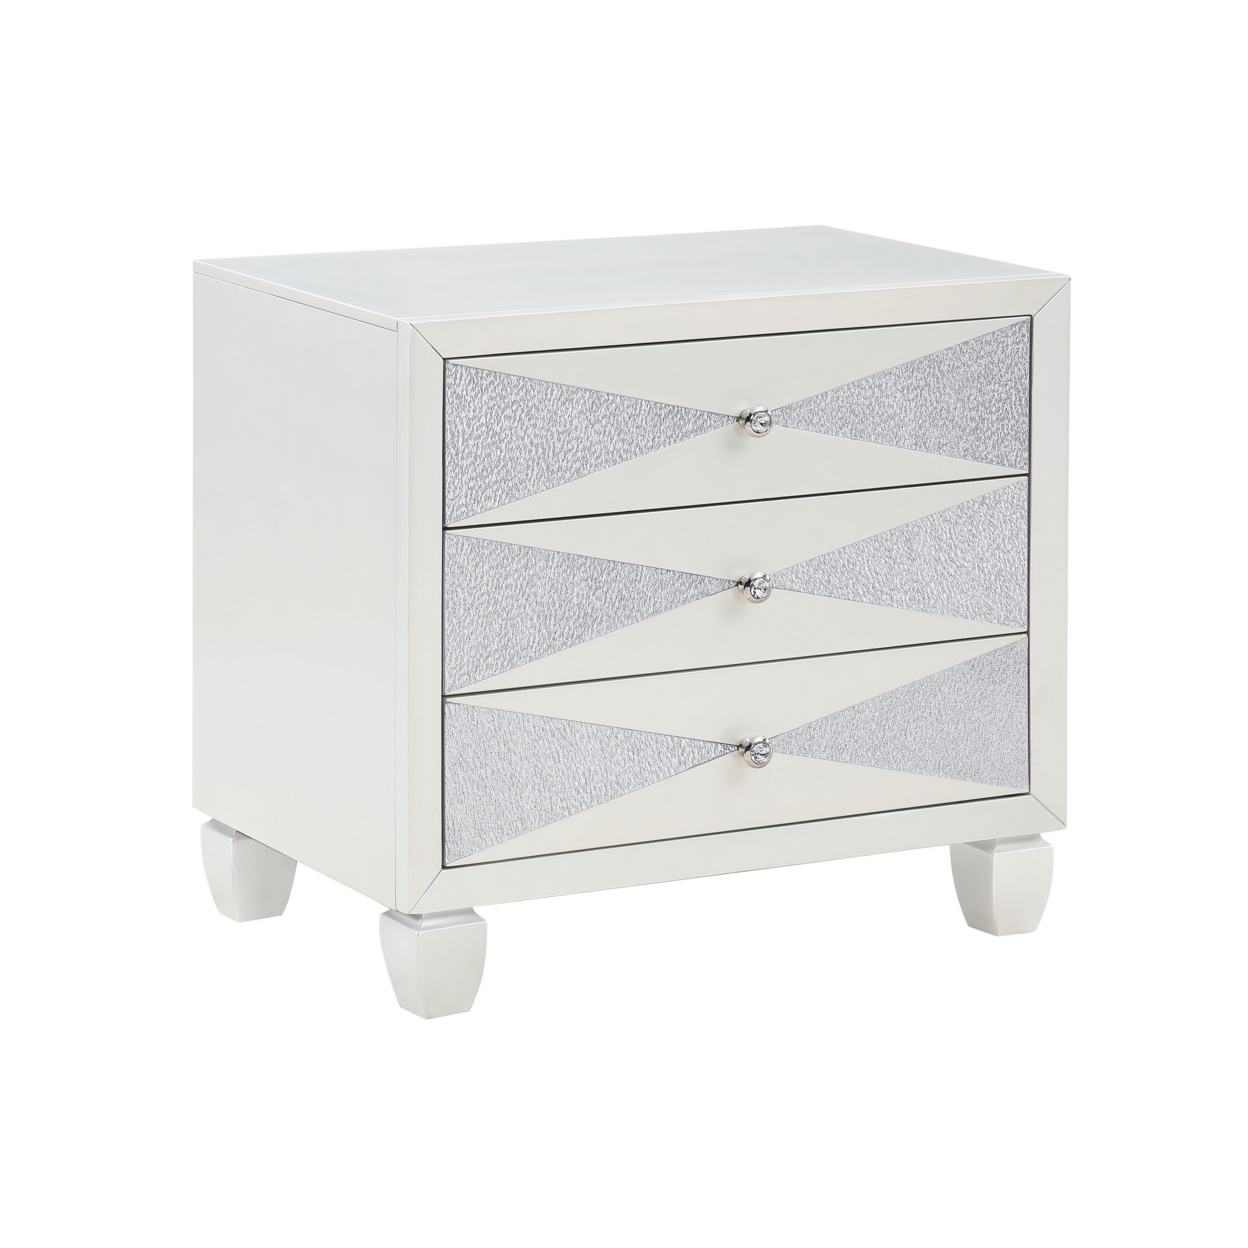 Lexi 28 Inch Modern Nightstand With 3 Drawers, Shimmer Accents, Off White- Saltoro Sherpi